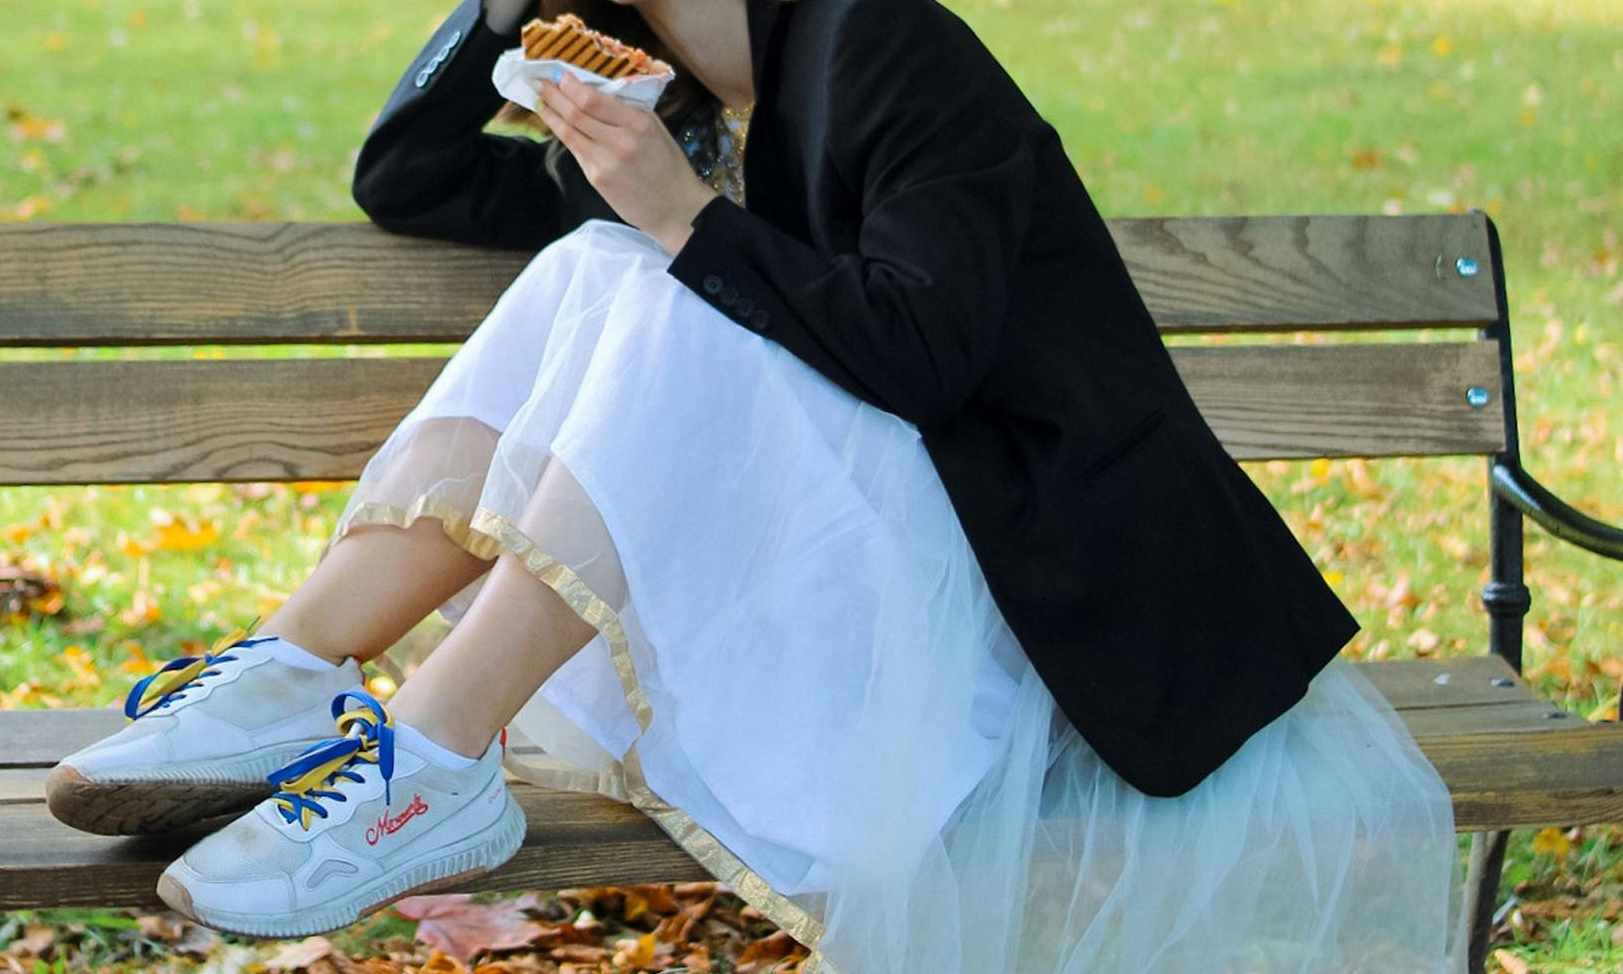 A woman eating a sandwich on a park bench | Source: Pexels